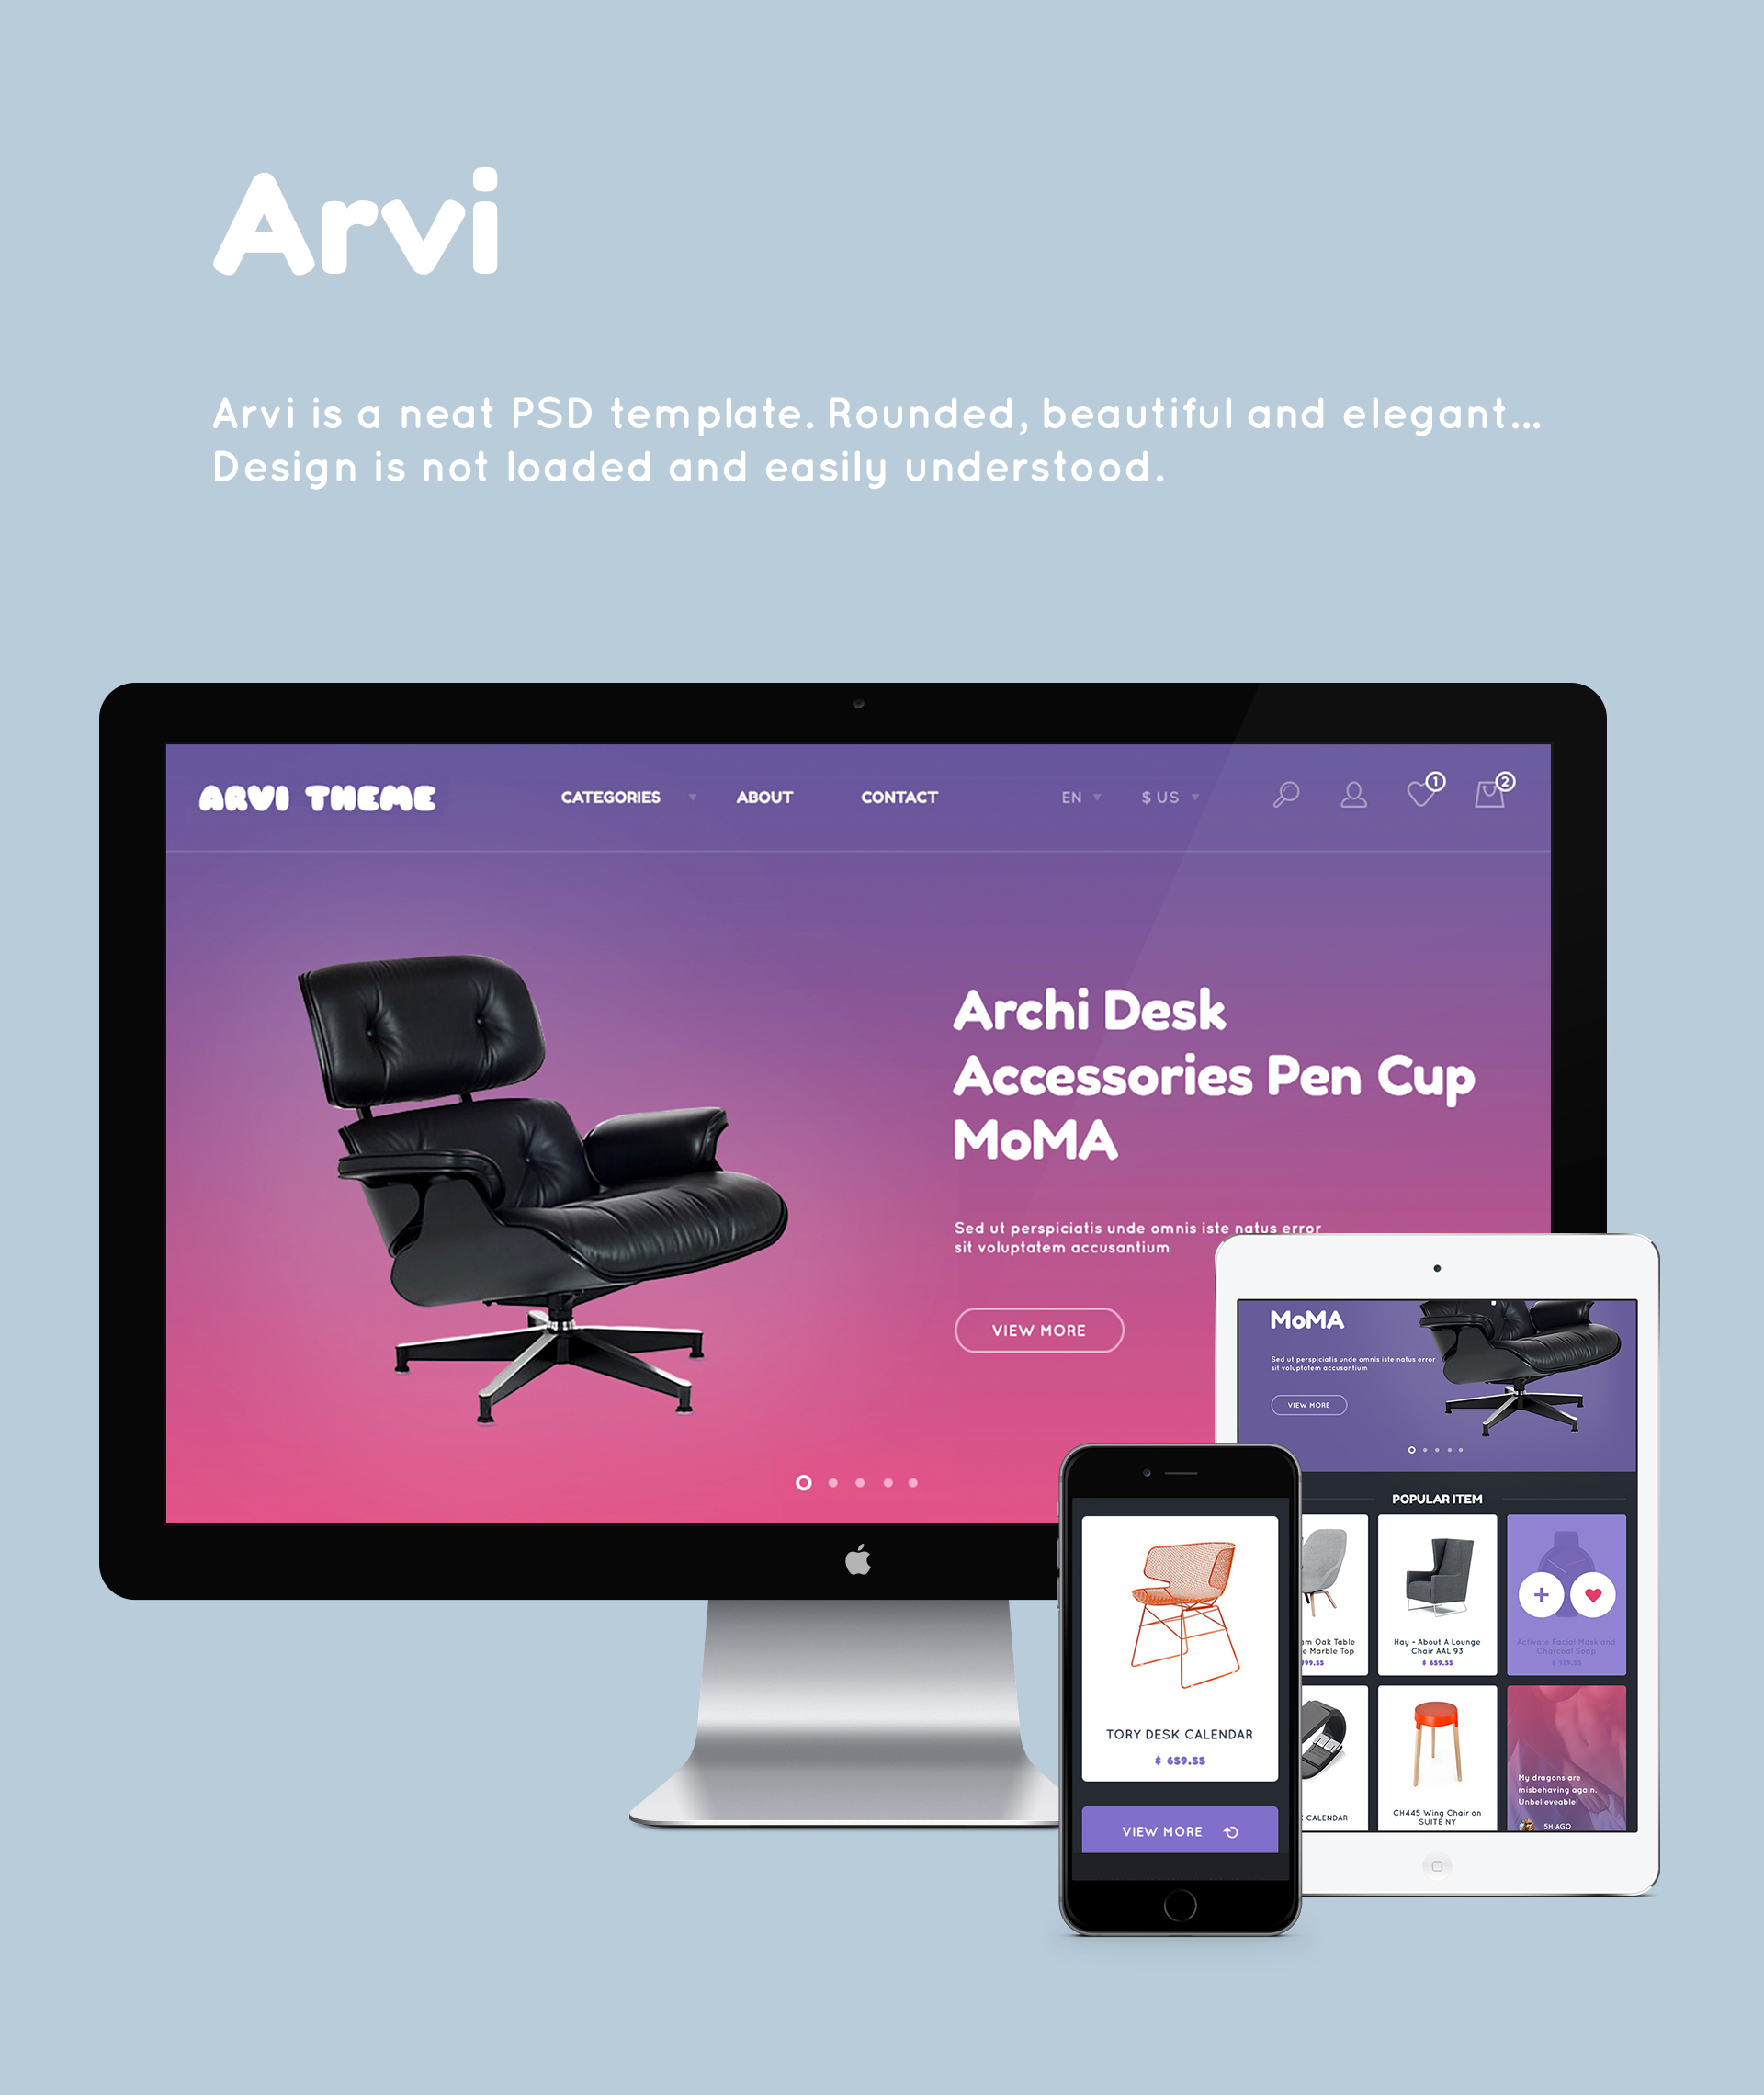 Free Download: Arvi PSD Template